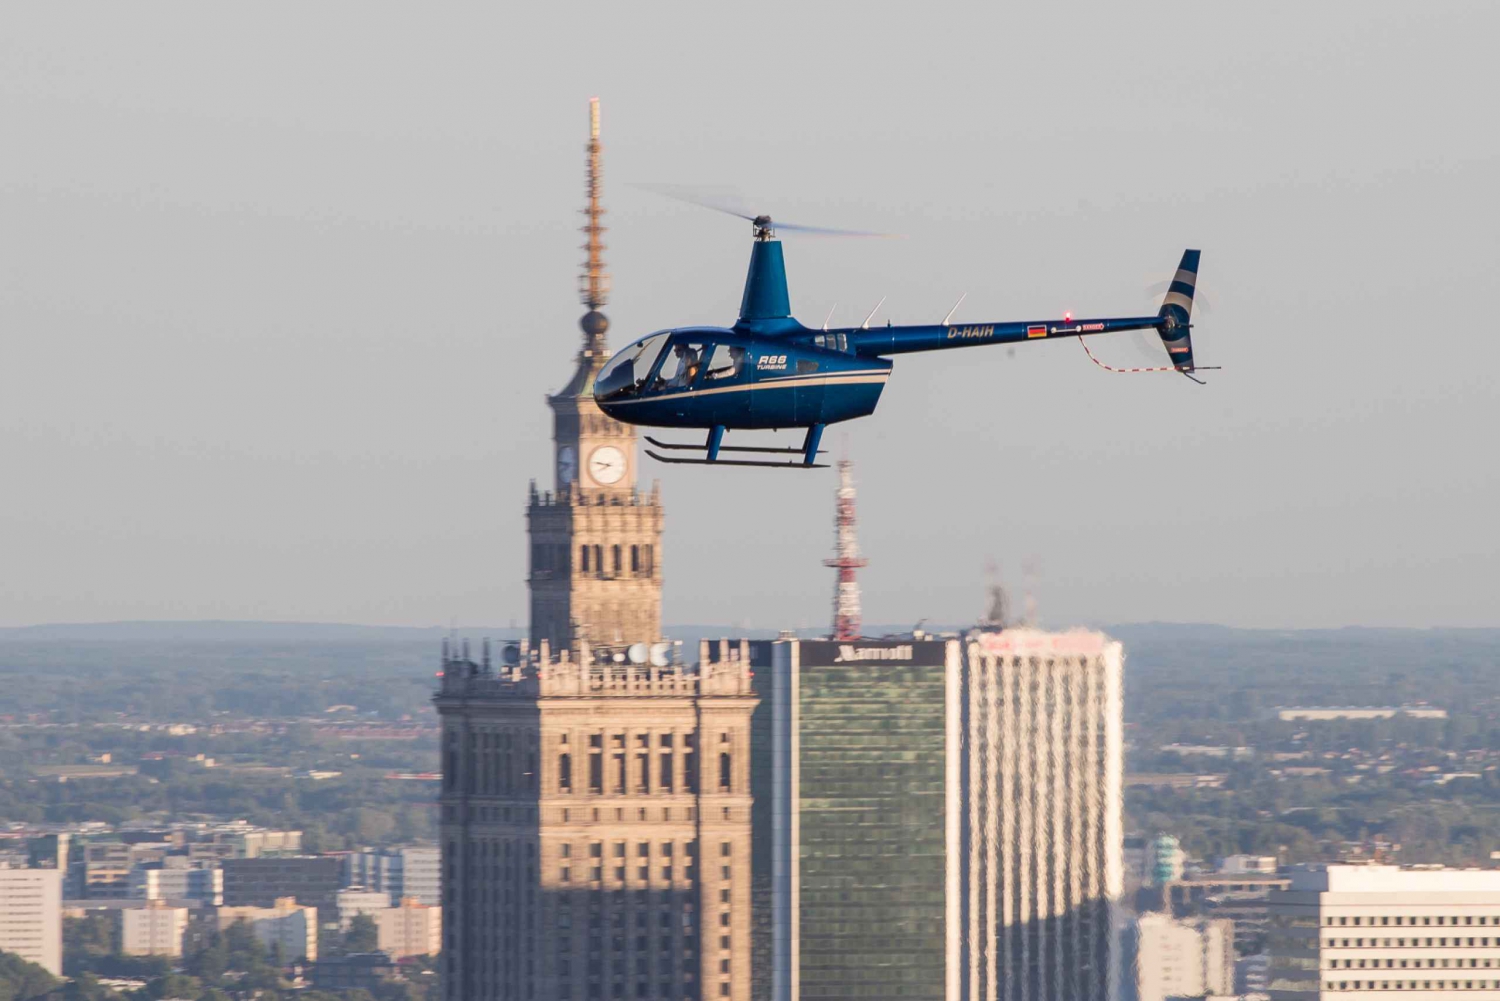 Warsaw: Helicopter Private Tour